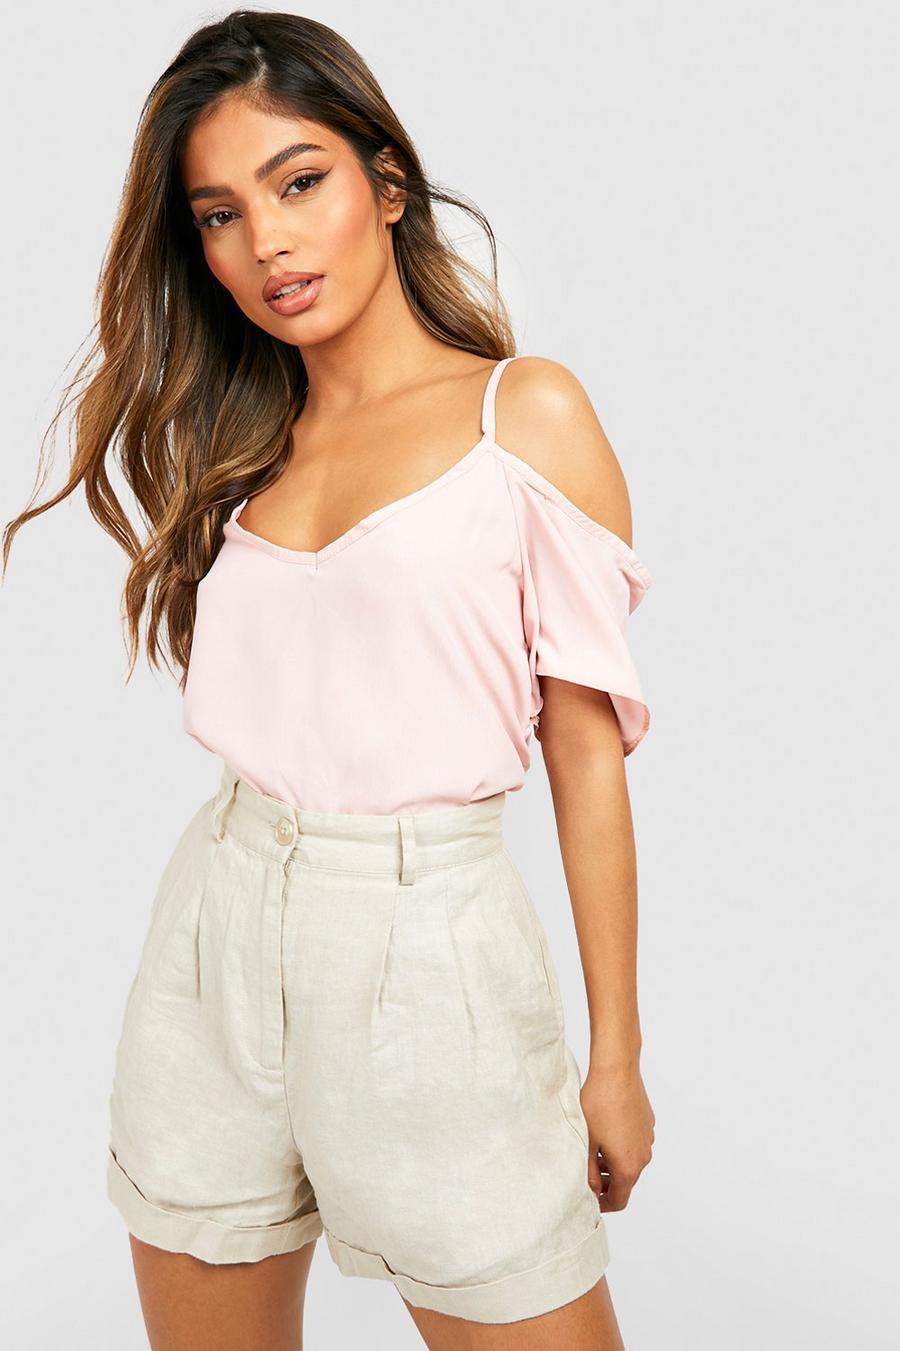 Nude color carne Woven Strappy Open Shoulder Top